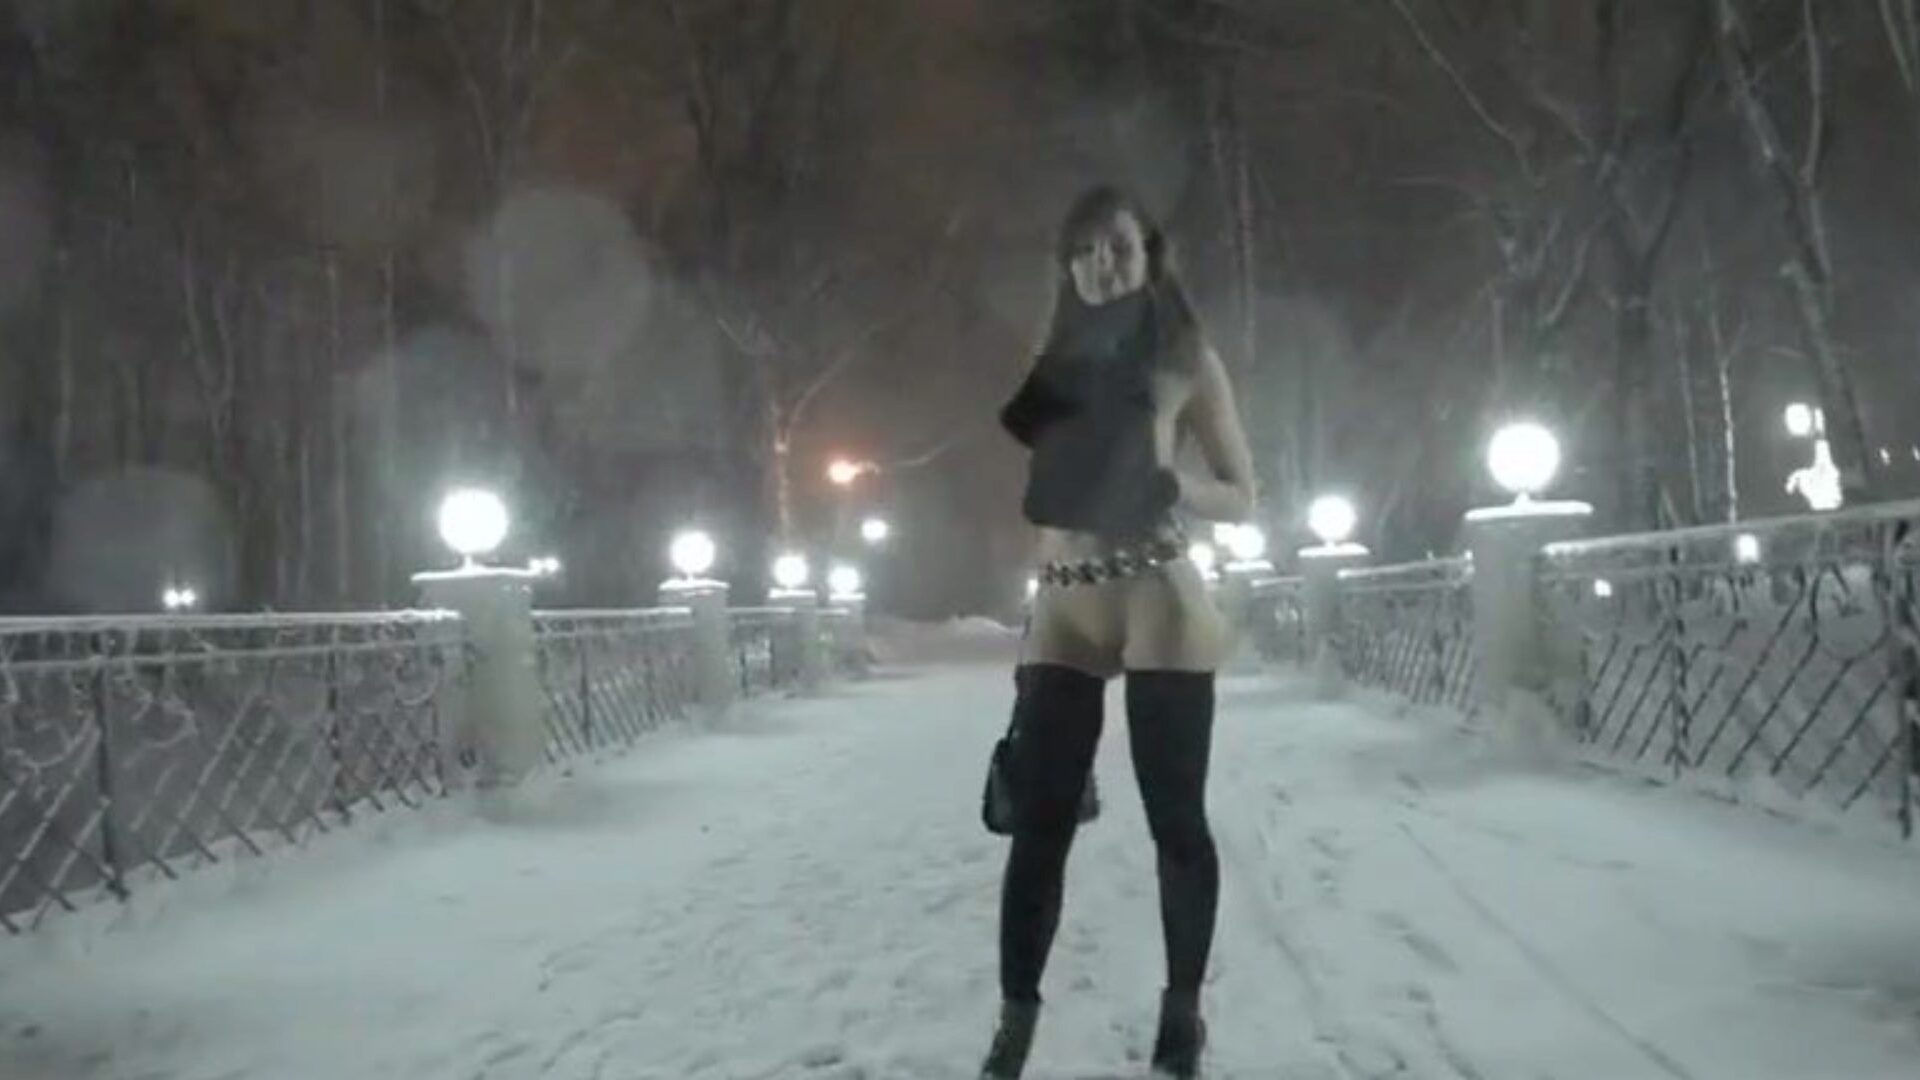 Jeny Smith naked in snow fall walking throughout the town